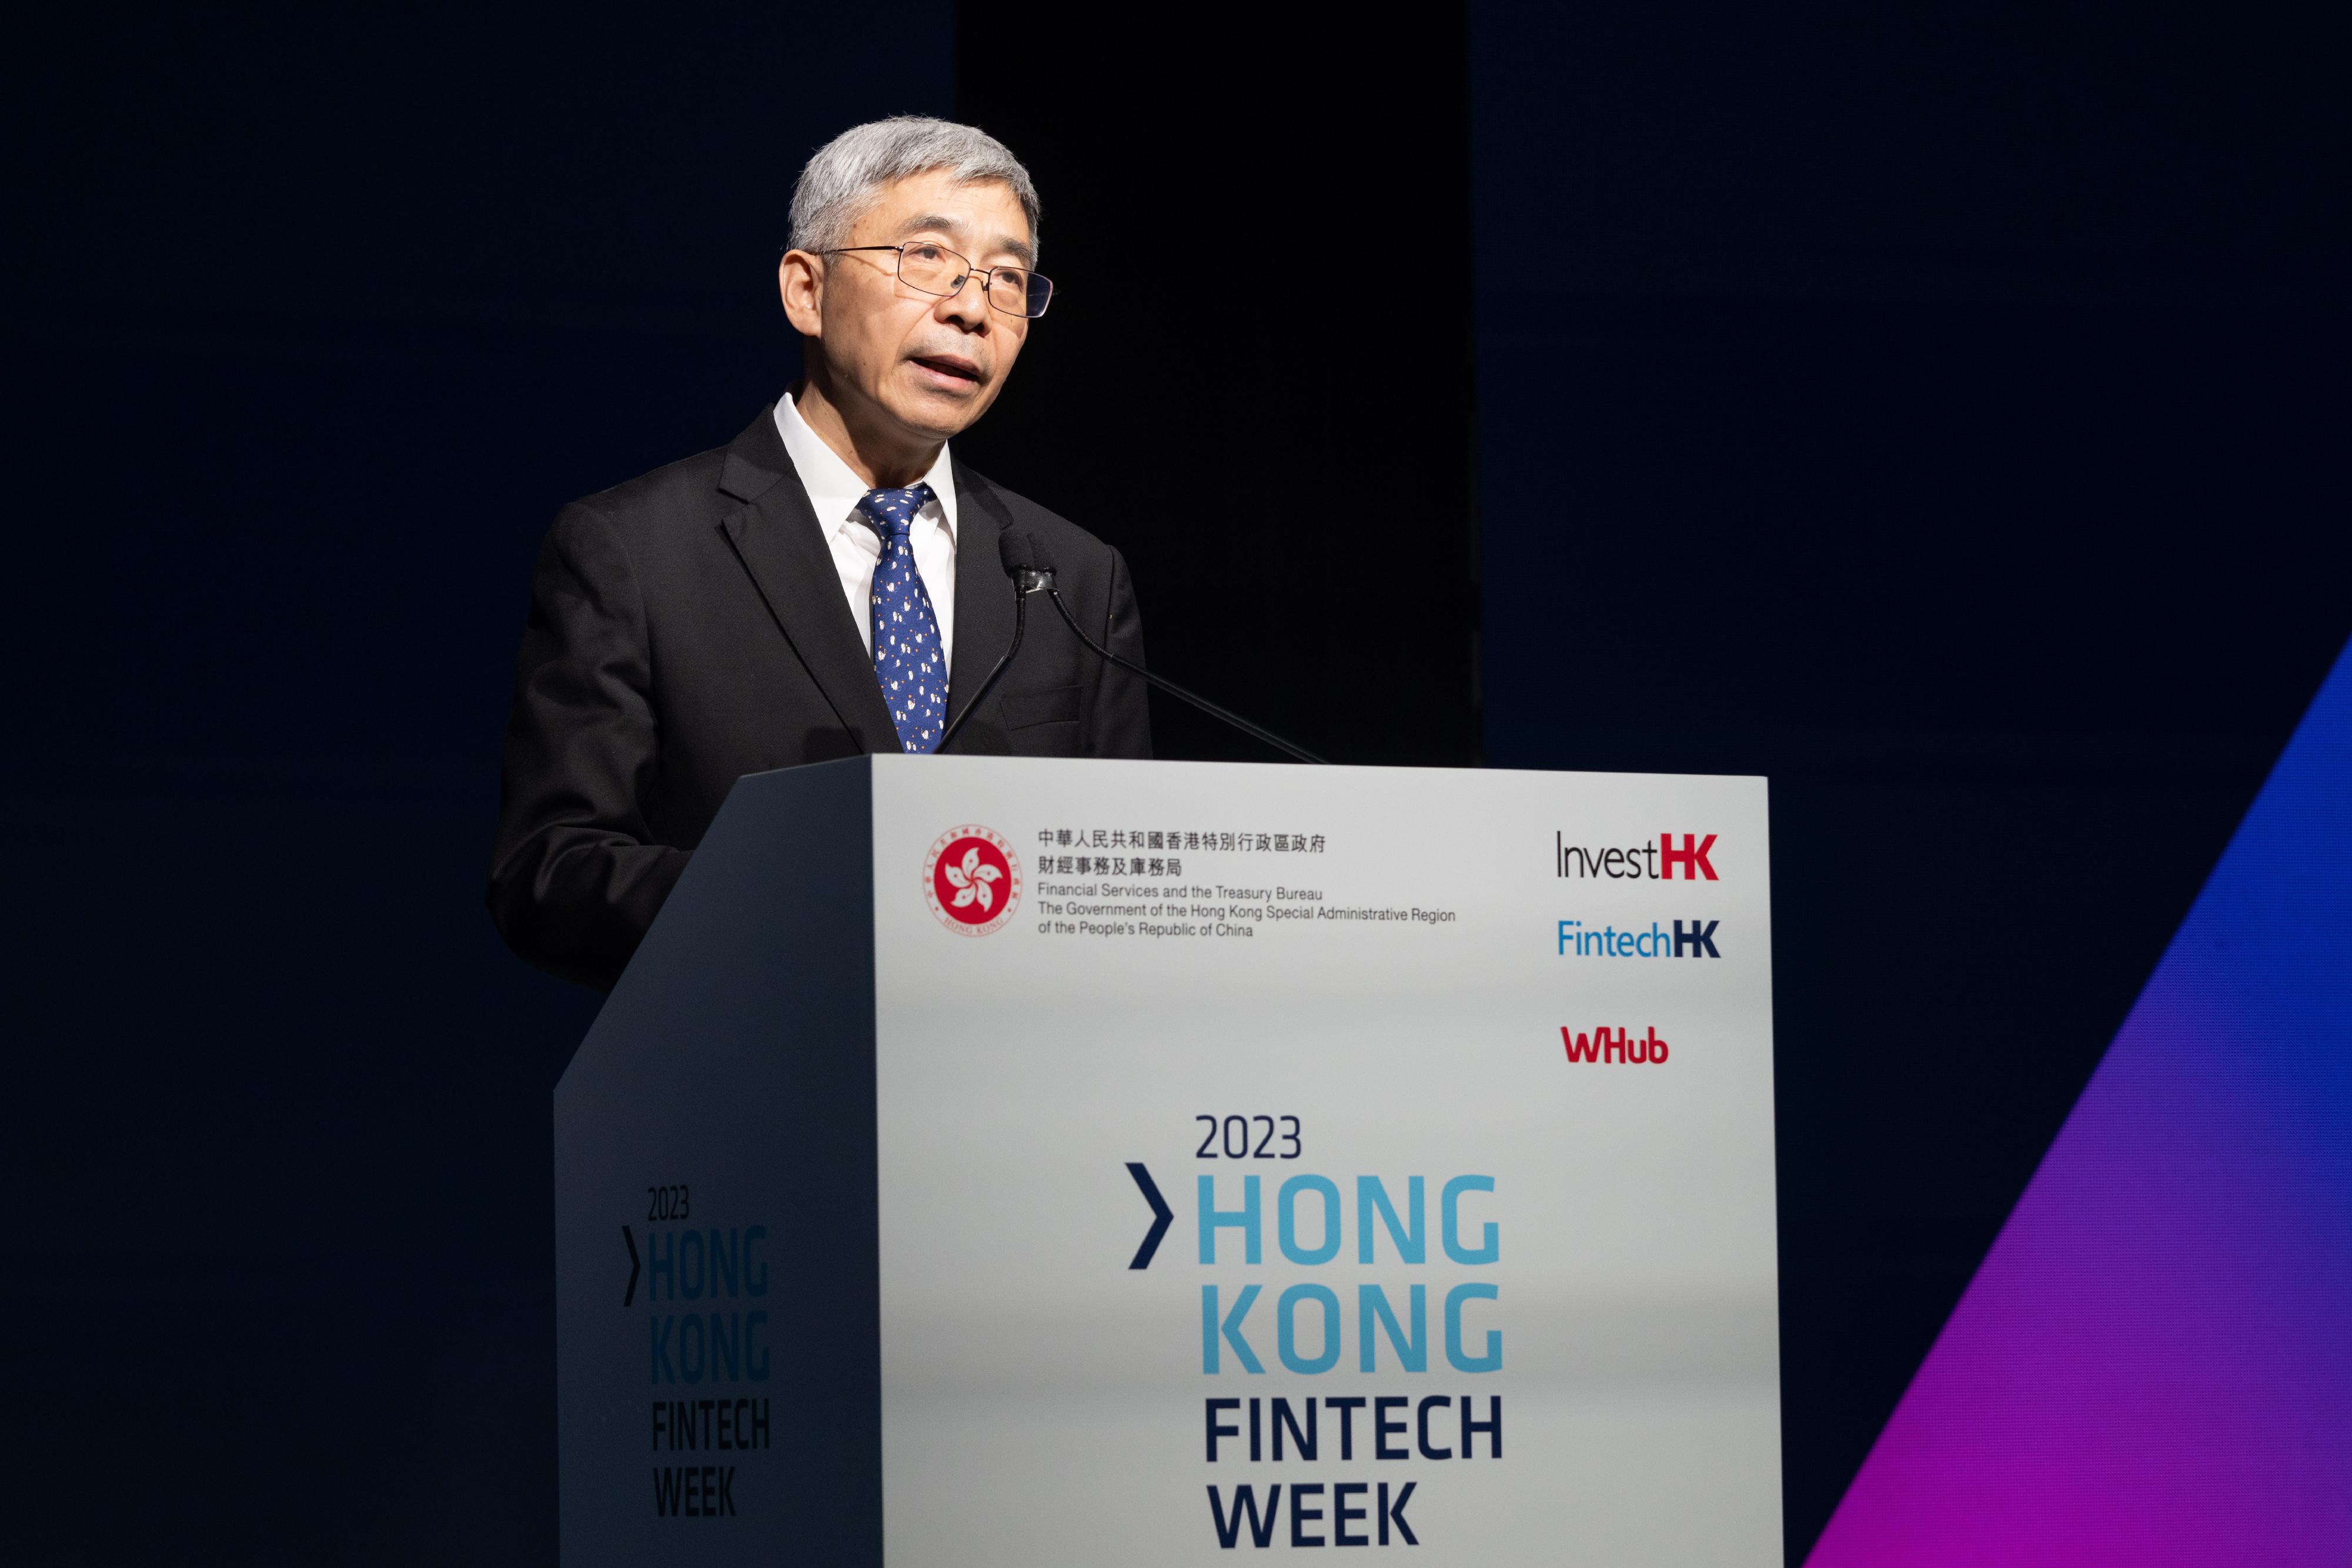 Hong Kong FinTech Week 2023 concluded on November 5, capping off a week-long feast of fintech that included the Greater Bay Area Day on October 31 and the two-day main conference on November 2 and 3. Photo shows Deputy Governor of the People's Bank of China, Mr Zhang Qingsong, speaking at Hong Kong FinTech Week 2023 on November 2.